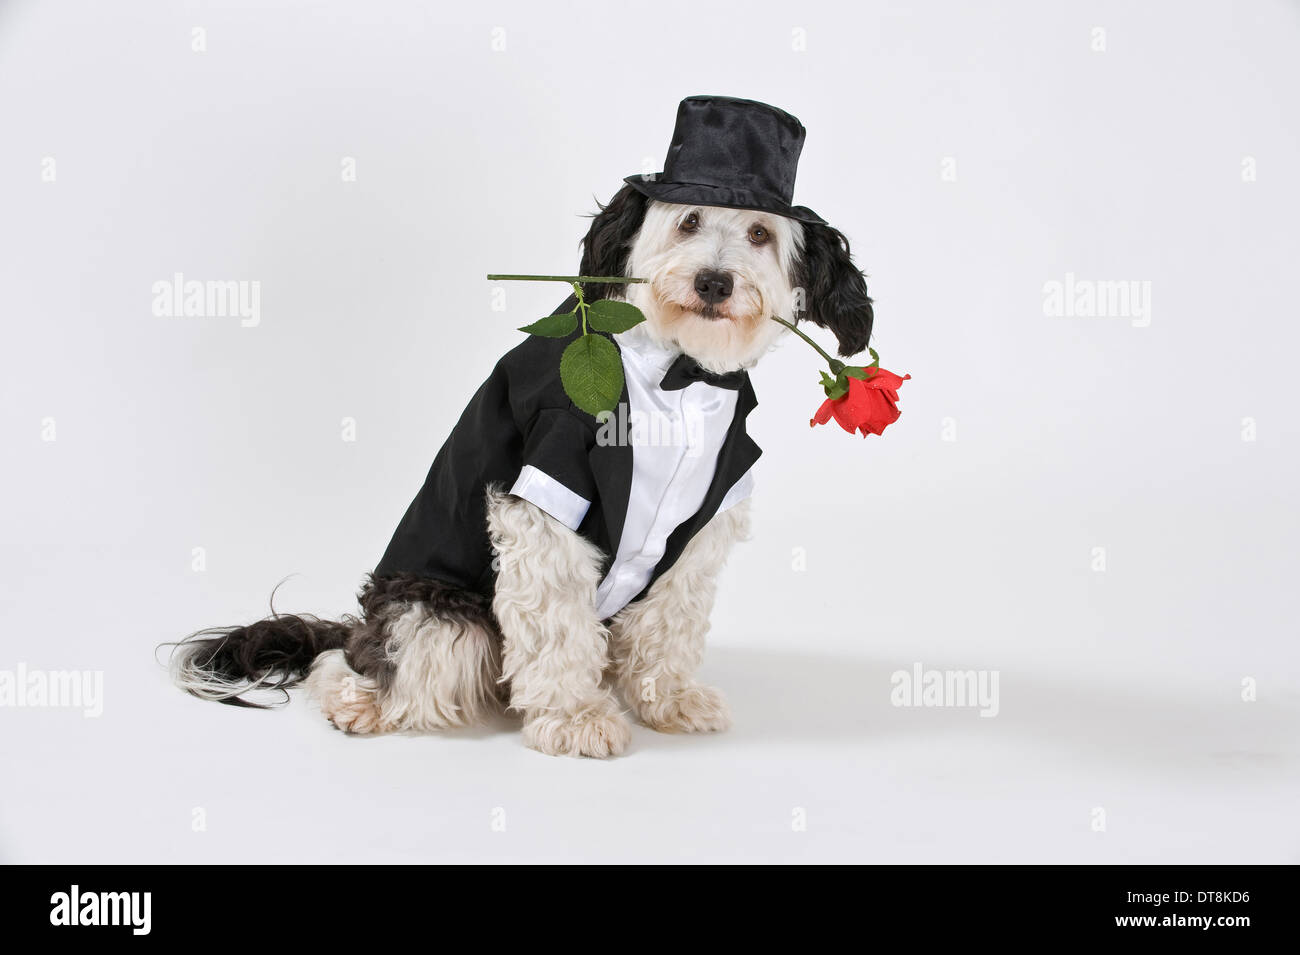 Mixed-breed dog Adult dressed in a tuxedo, wearing a tophat and a red rose  in its snout, sitting Studio picture against a white Stock Photo - Alamy